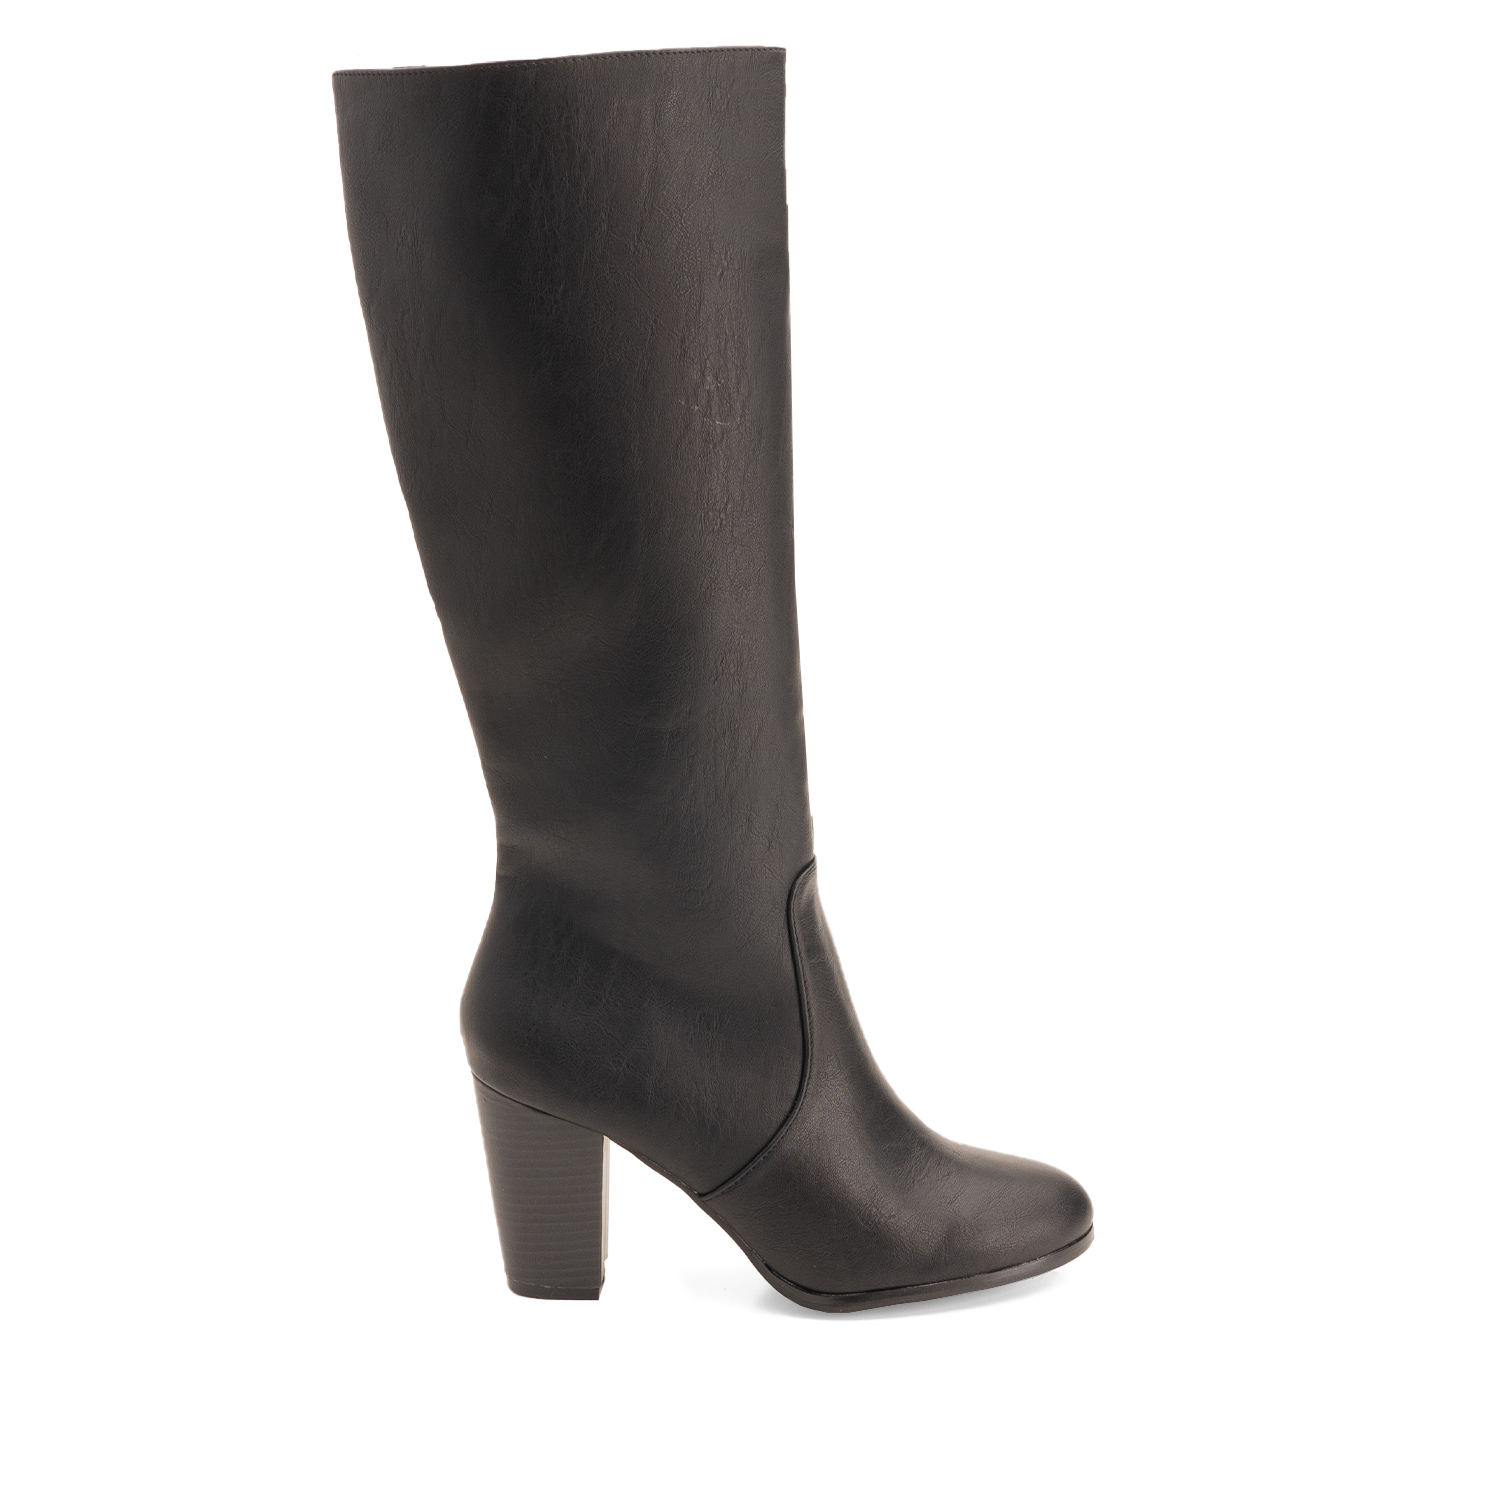 Heled mid-calf boots in black faux leather - Women, Boots, Women ...